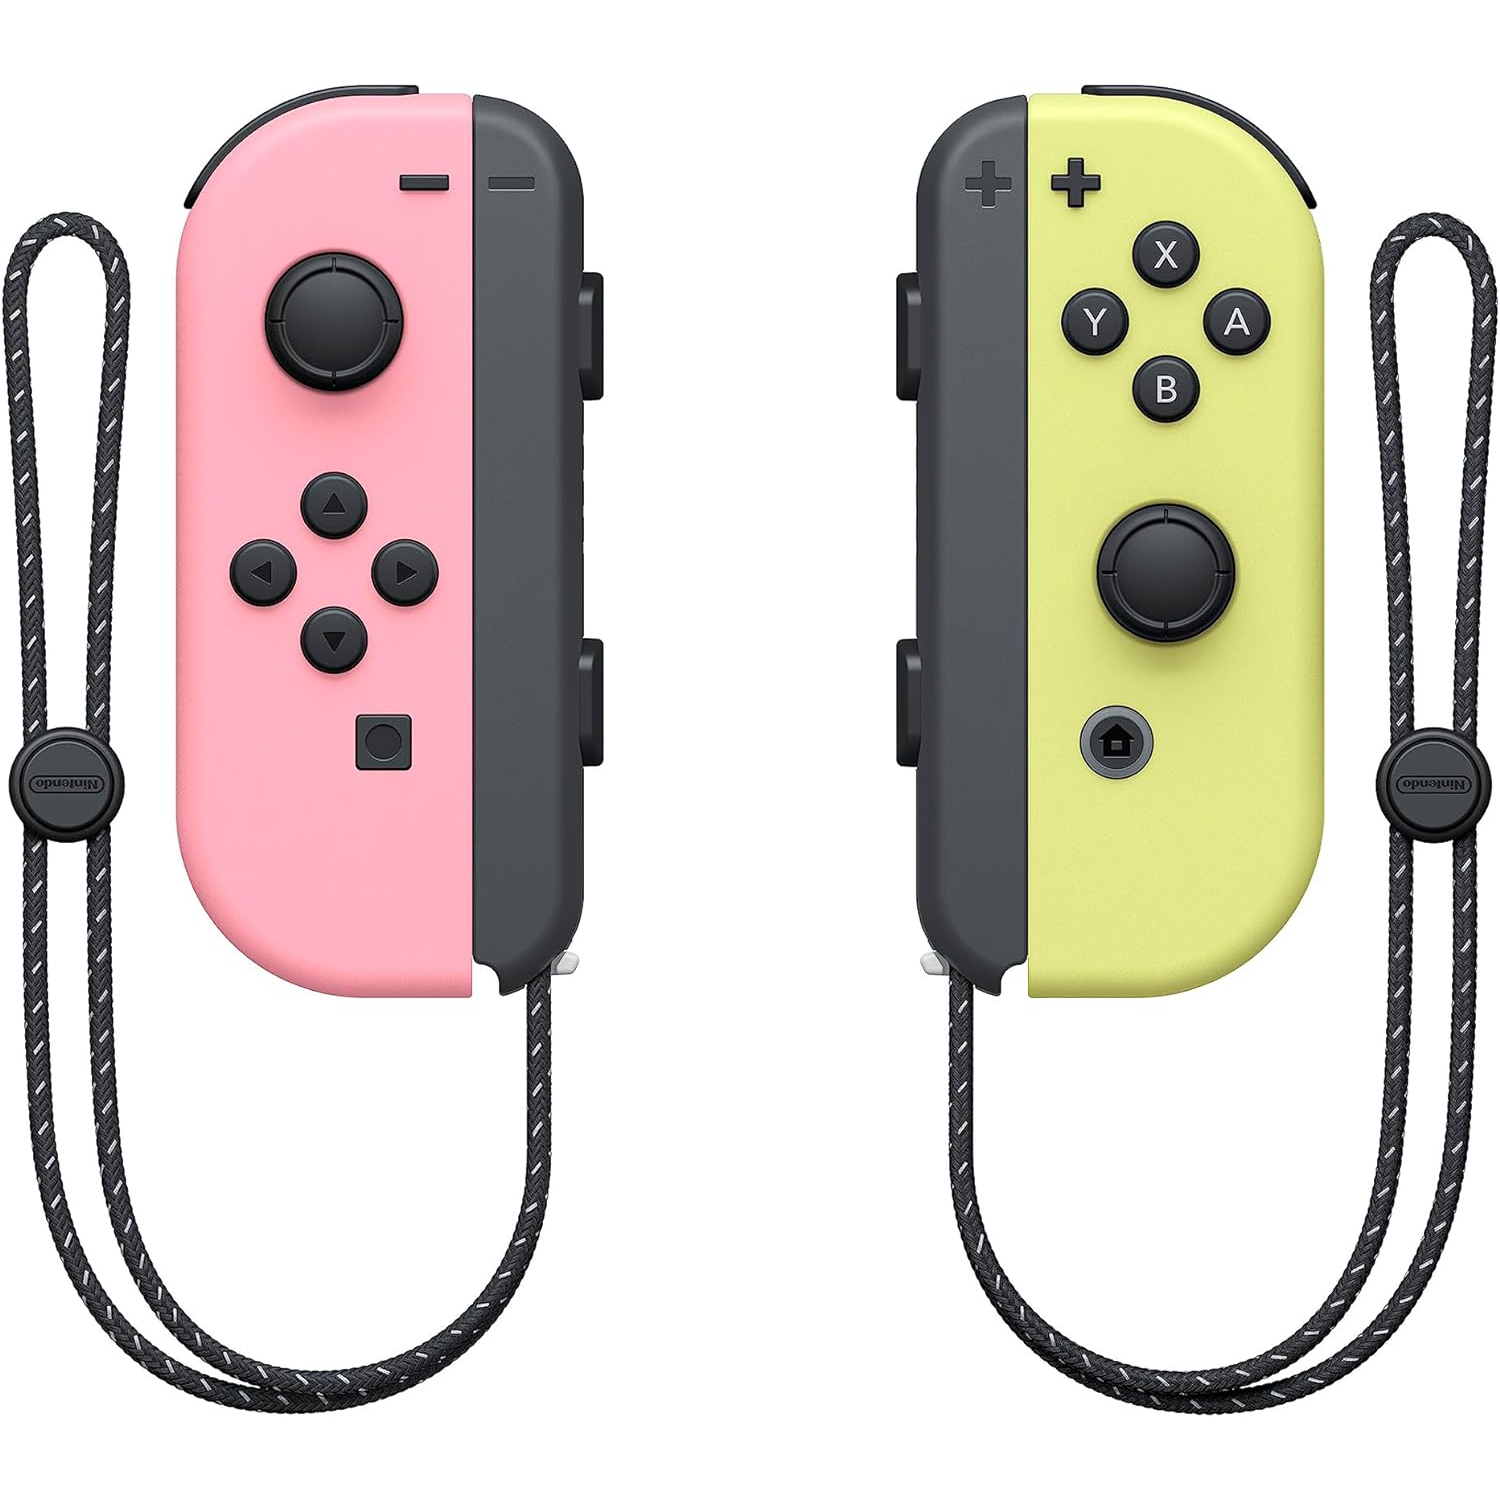 Refurbished (Good) Nintendo Switch Original Left and Right Joy-Con Controllers - Pastel Pink / Pastel Yellow